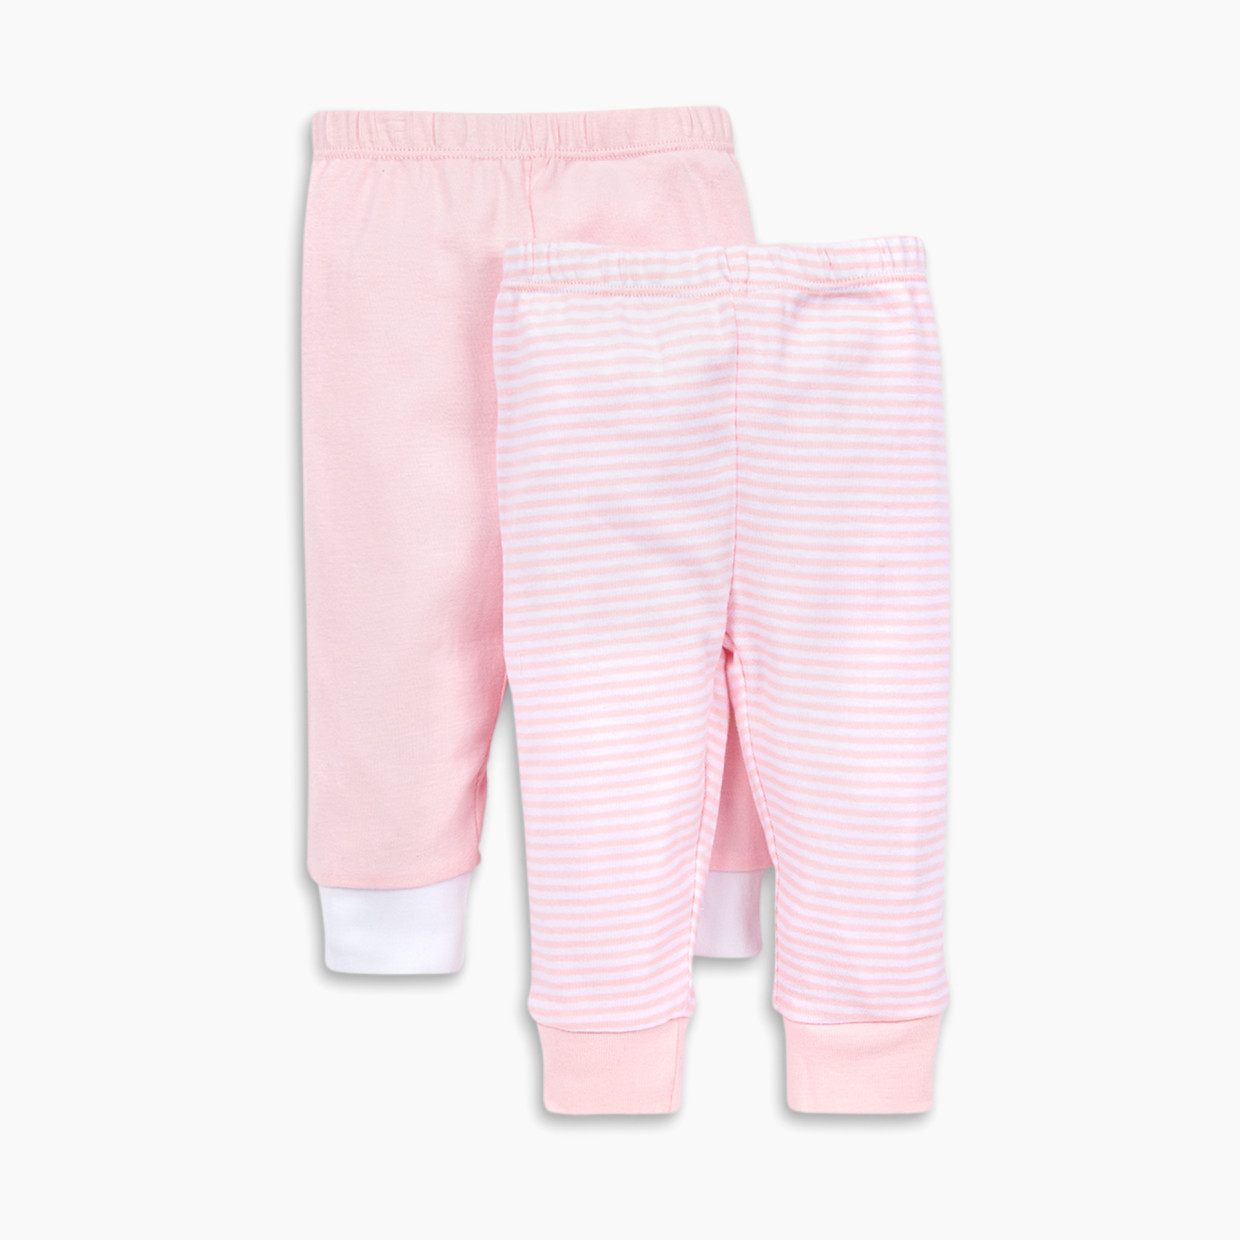 Burt's Bees Baby Organic Footless Pants (2 Pack) - Blossom, 3-6 Months.